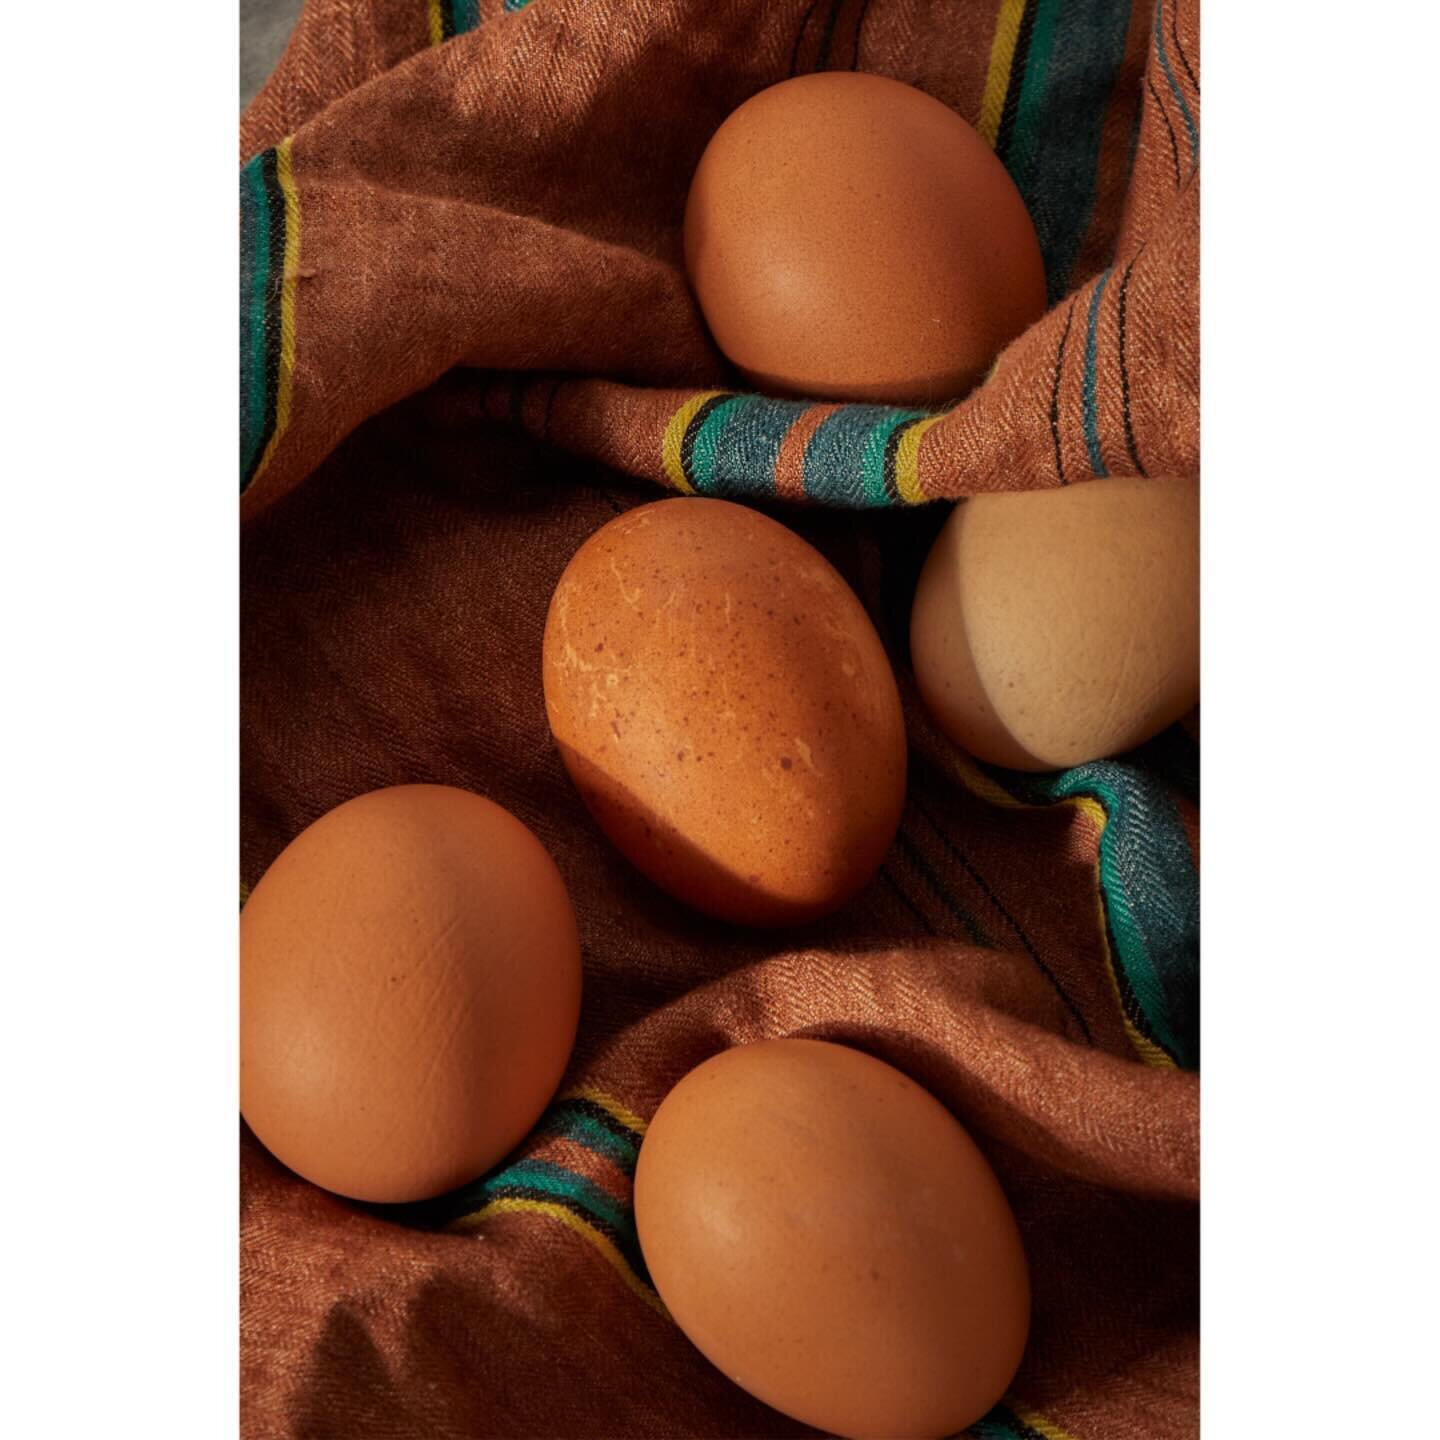 One goal for this year is to incorporate more soft light into my work, but I can never resist taking off the diffuser to see what works better. Which lighting do you prefer for these local eggs and textiles from @riccardobarthel? #pageandplate #foodp